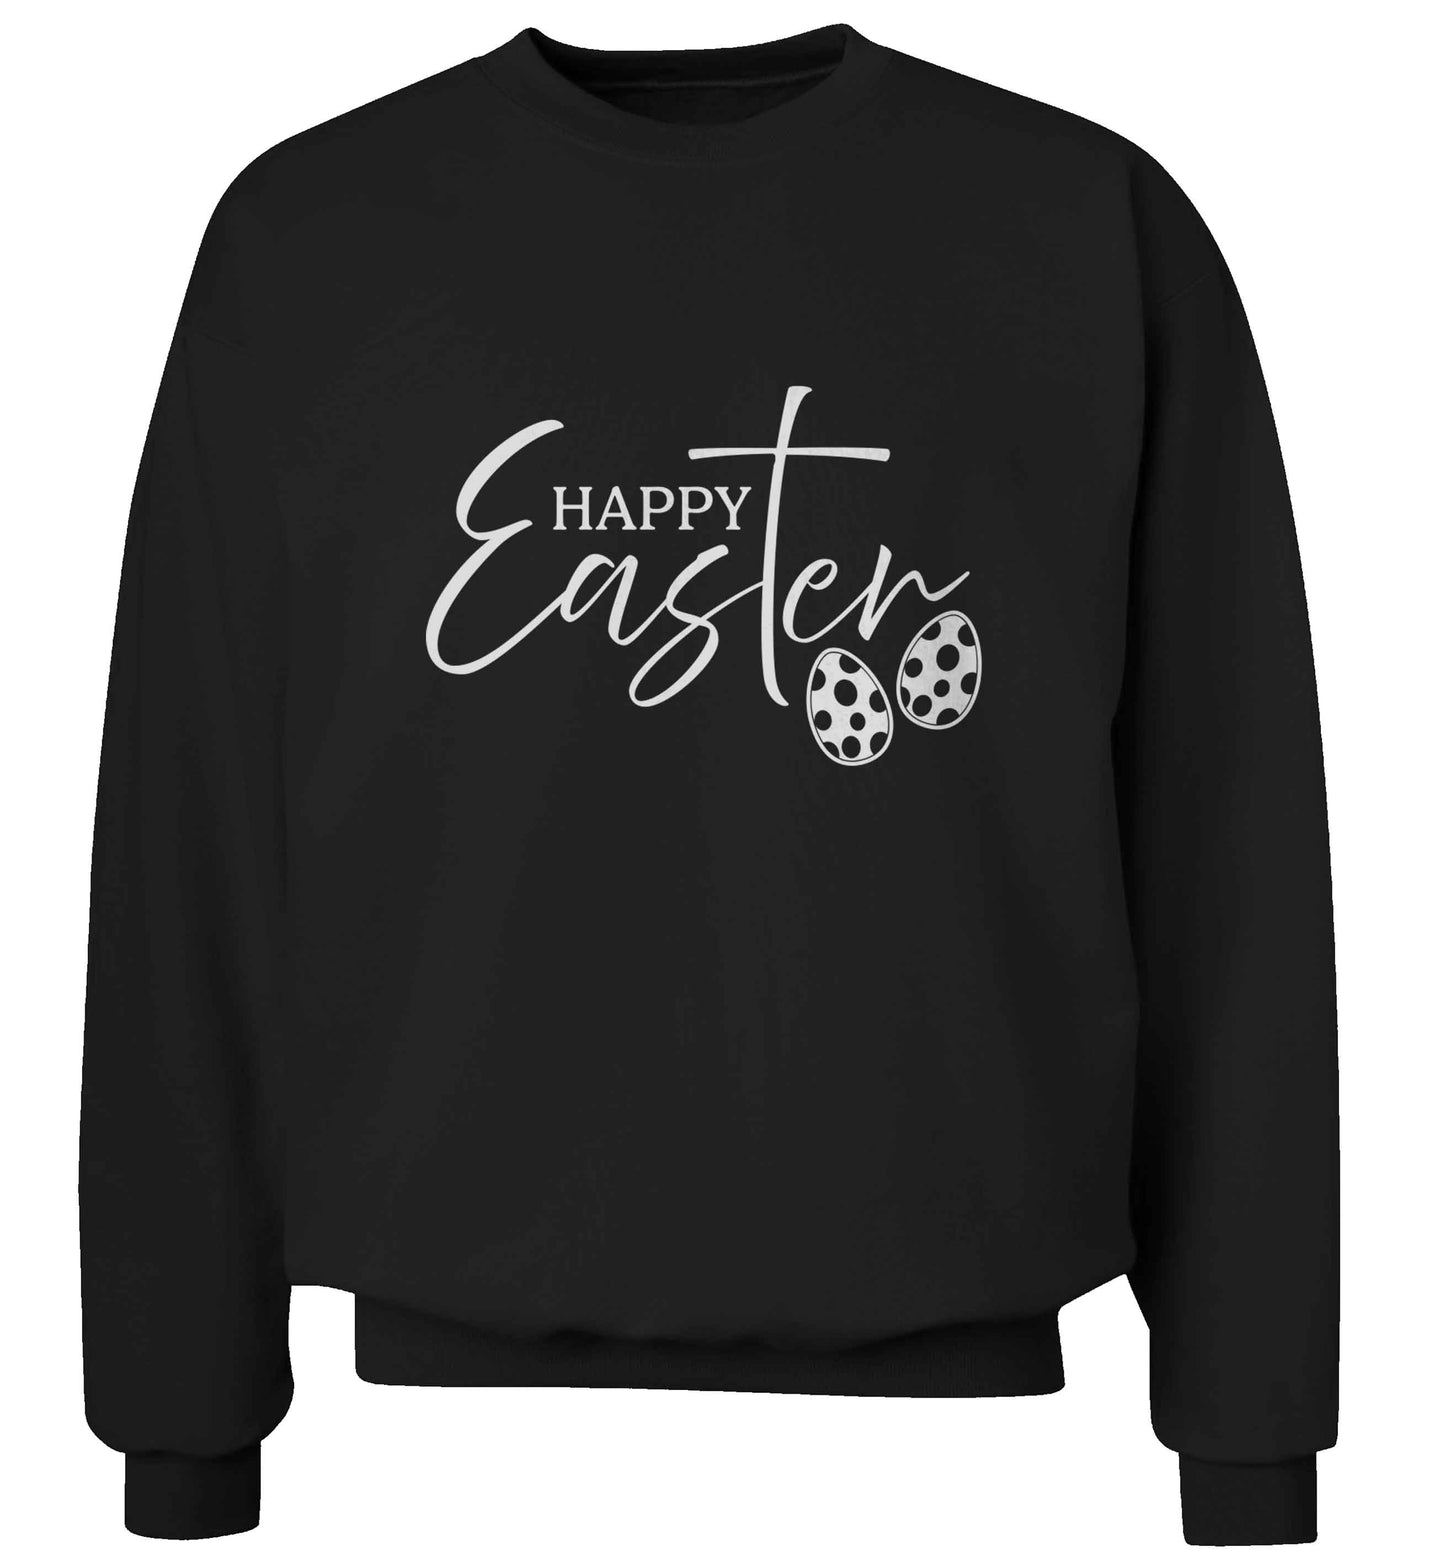 Happy Easter adult's unisex black sweater 2XL